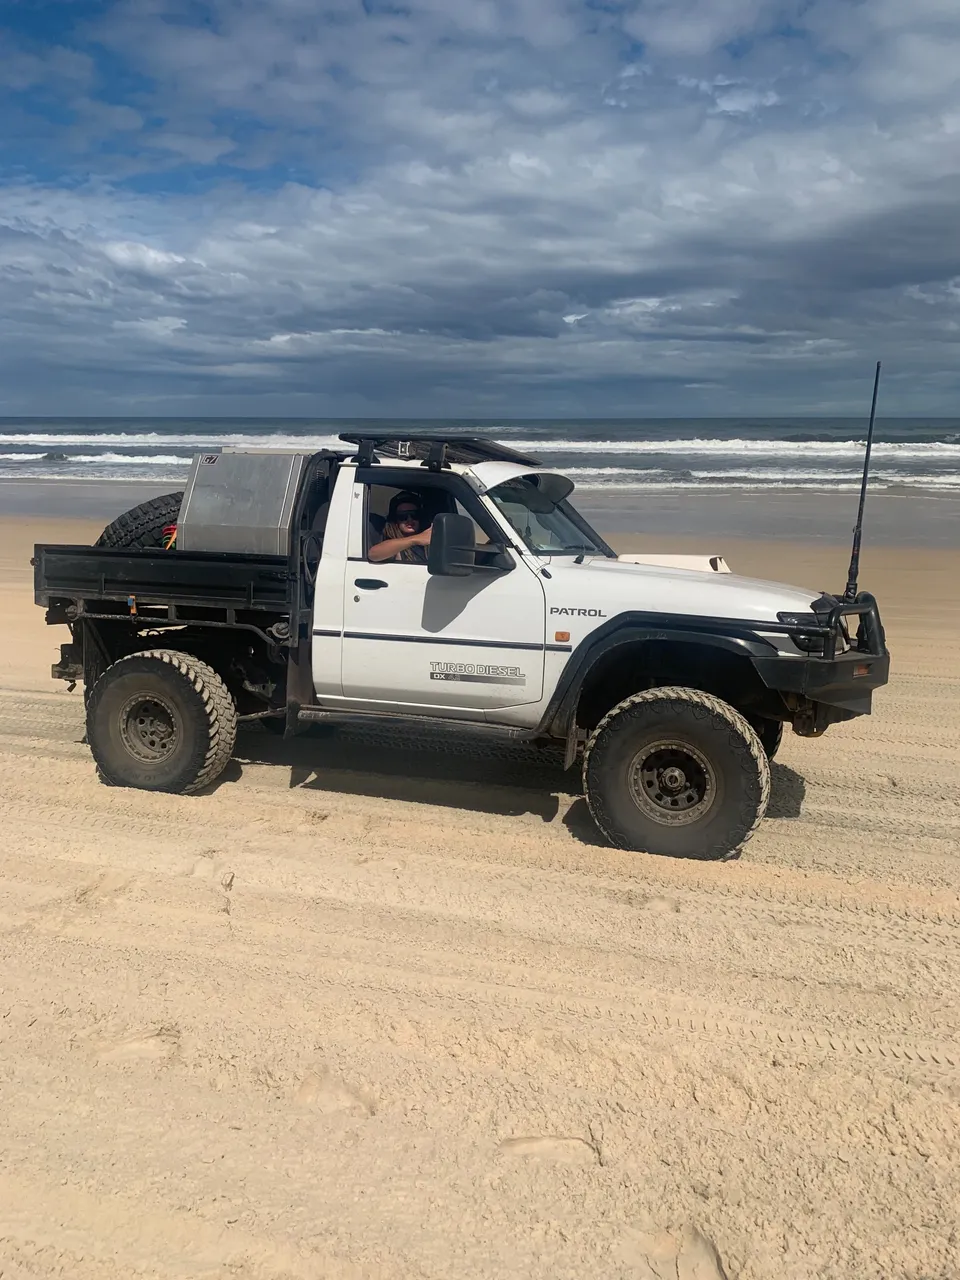 Driving up the beach (Noosa North Shore)